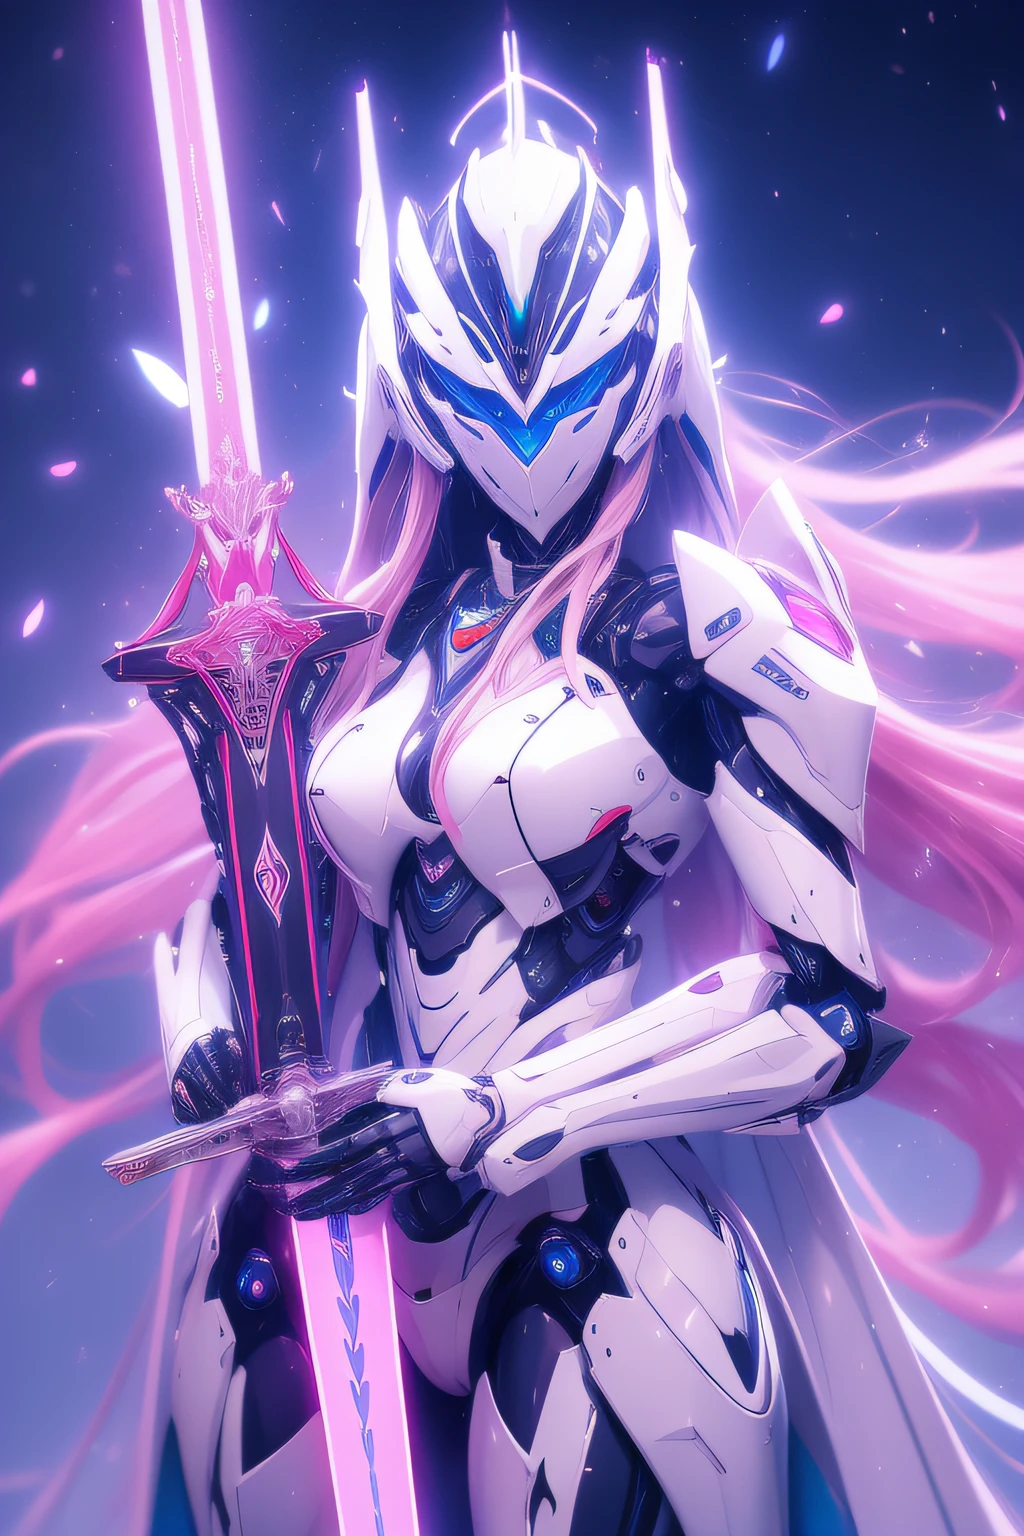 mecha_musume, 1 robot knight, long_hair, science_fiction, weapon, lightsaber, holding_sword, blue_eyes, solo, headdress, holding_weapon, mecha, bust, pink and white livery, angel halo, sad gaze, upper body, mermaid line,